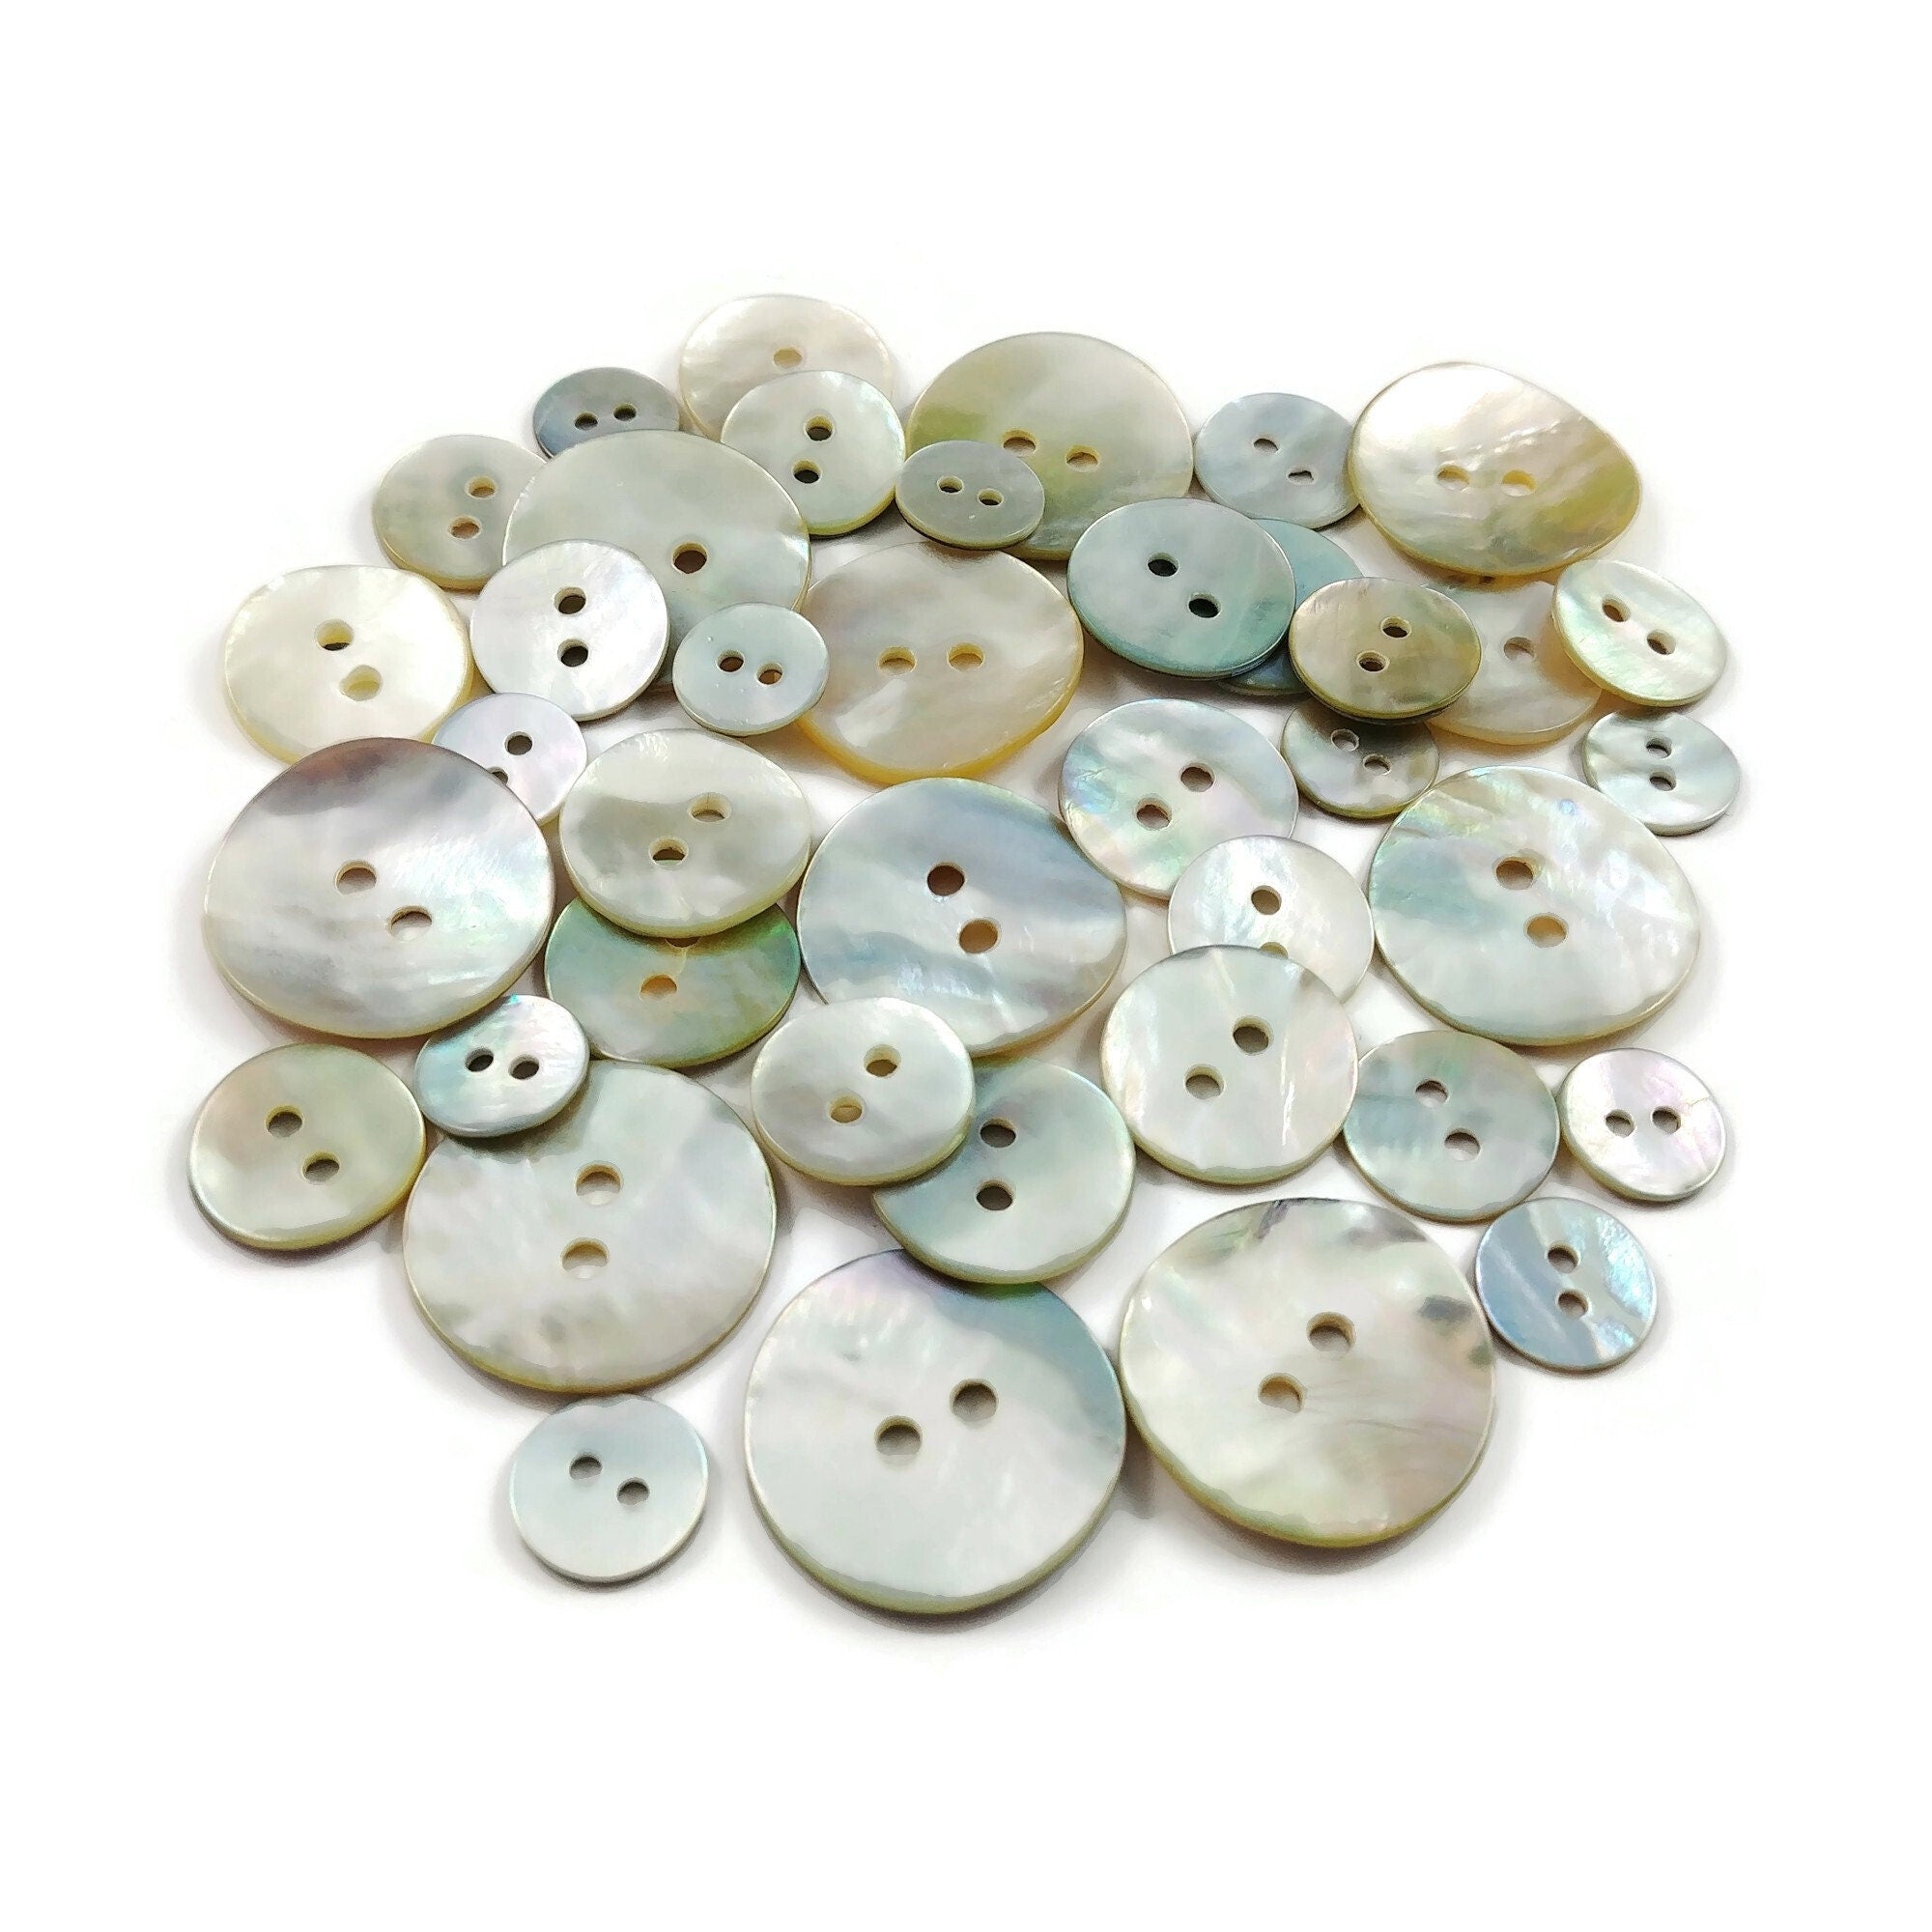 Summer flower buttons - Mother of Pearl Shell Buttons 30mm - set of 4 eco  friendly natural buttons